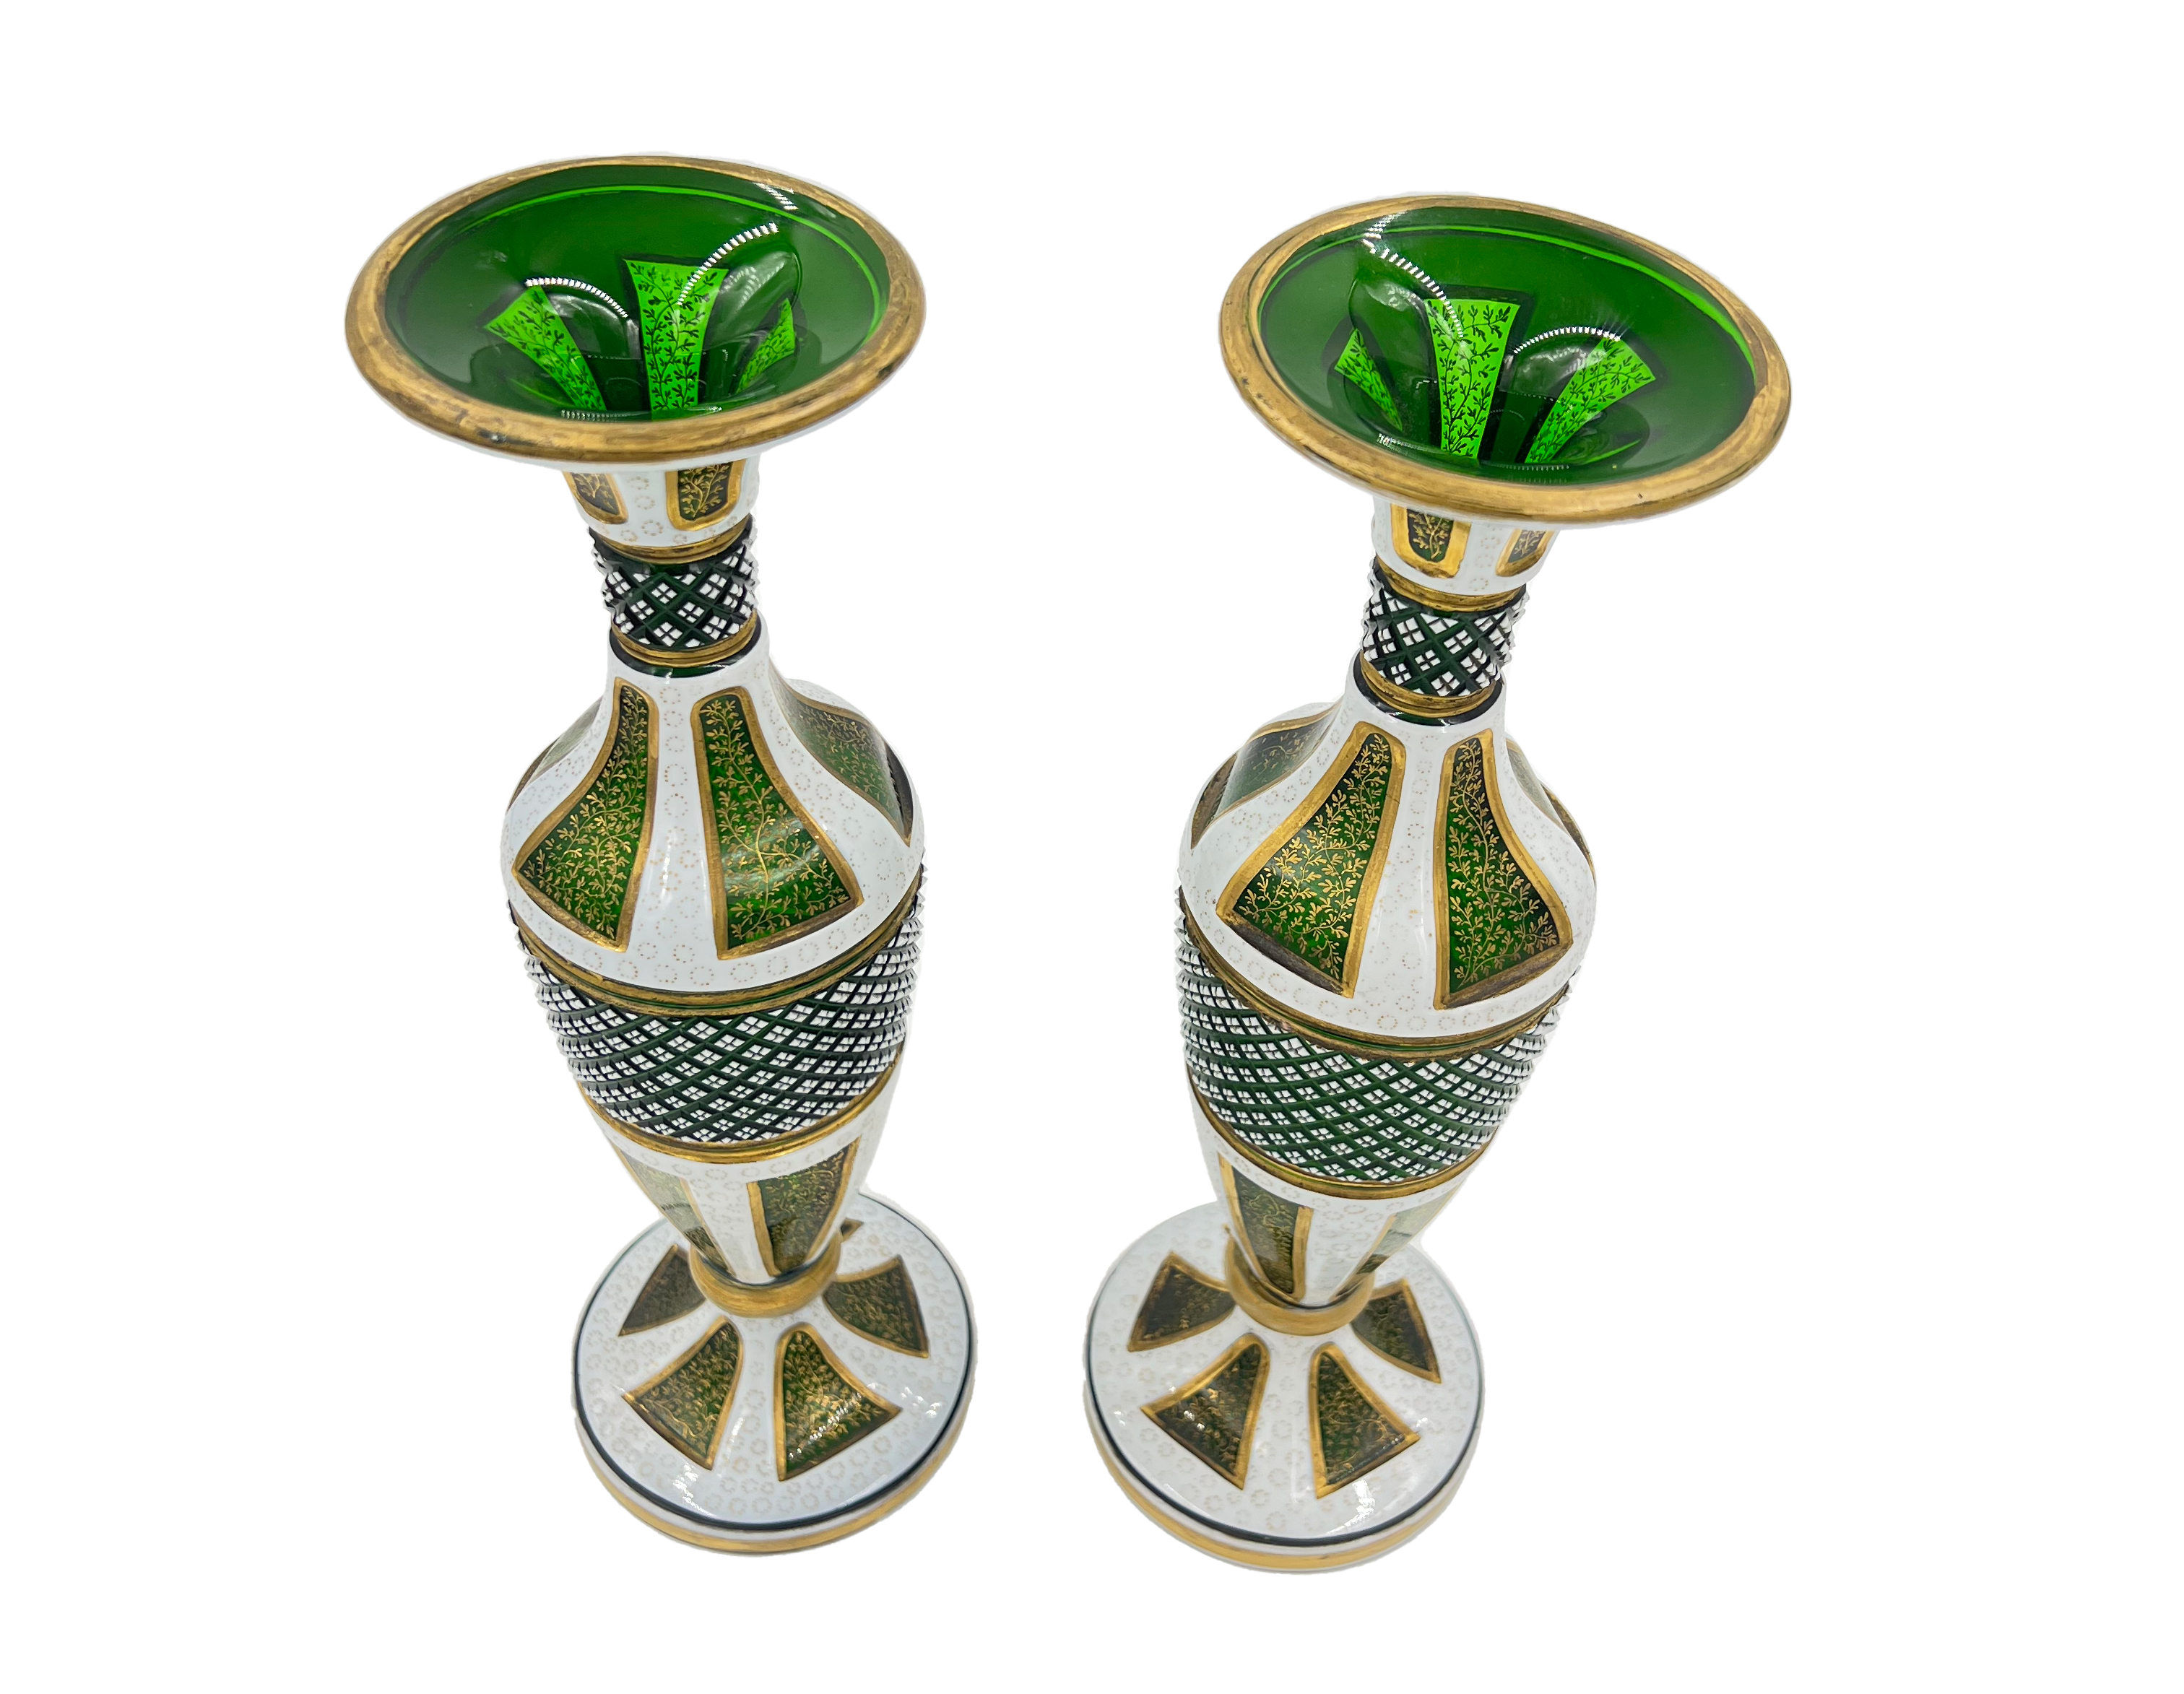 PAIR OF BOHEMIAN GLASS VASES, LATE 19TH CENTURY - Image 2 of 2